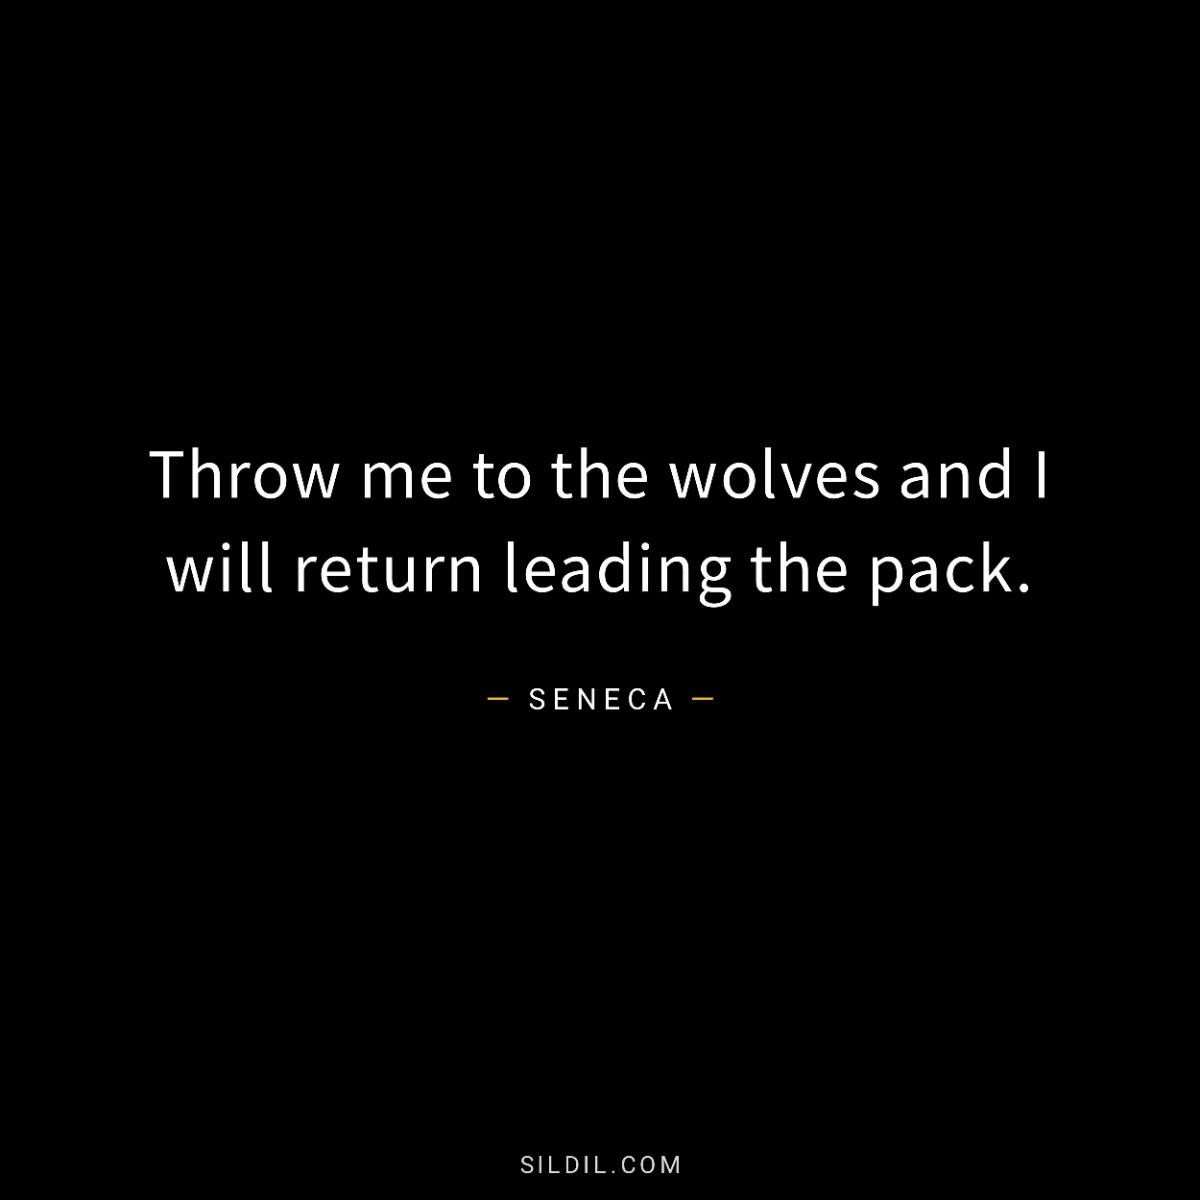 Throw me to the wolves and I will return leading the pack.